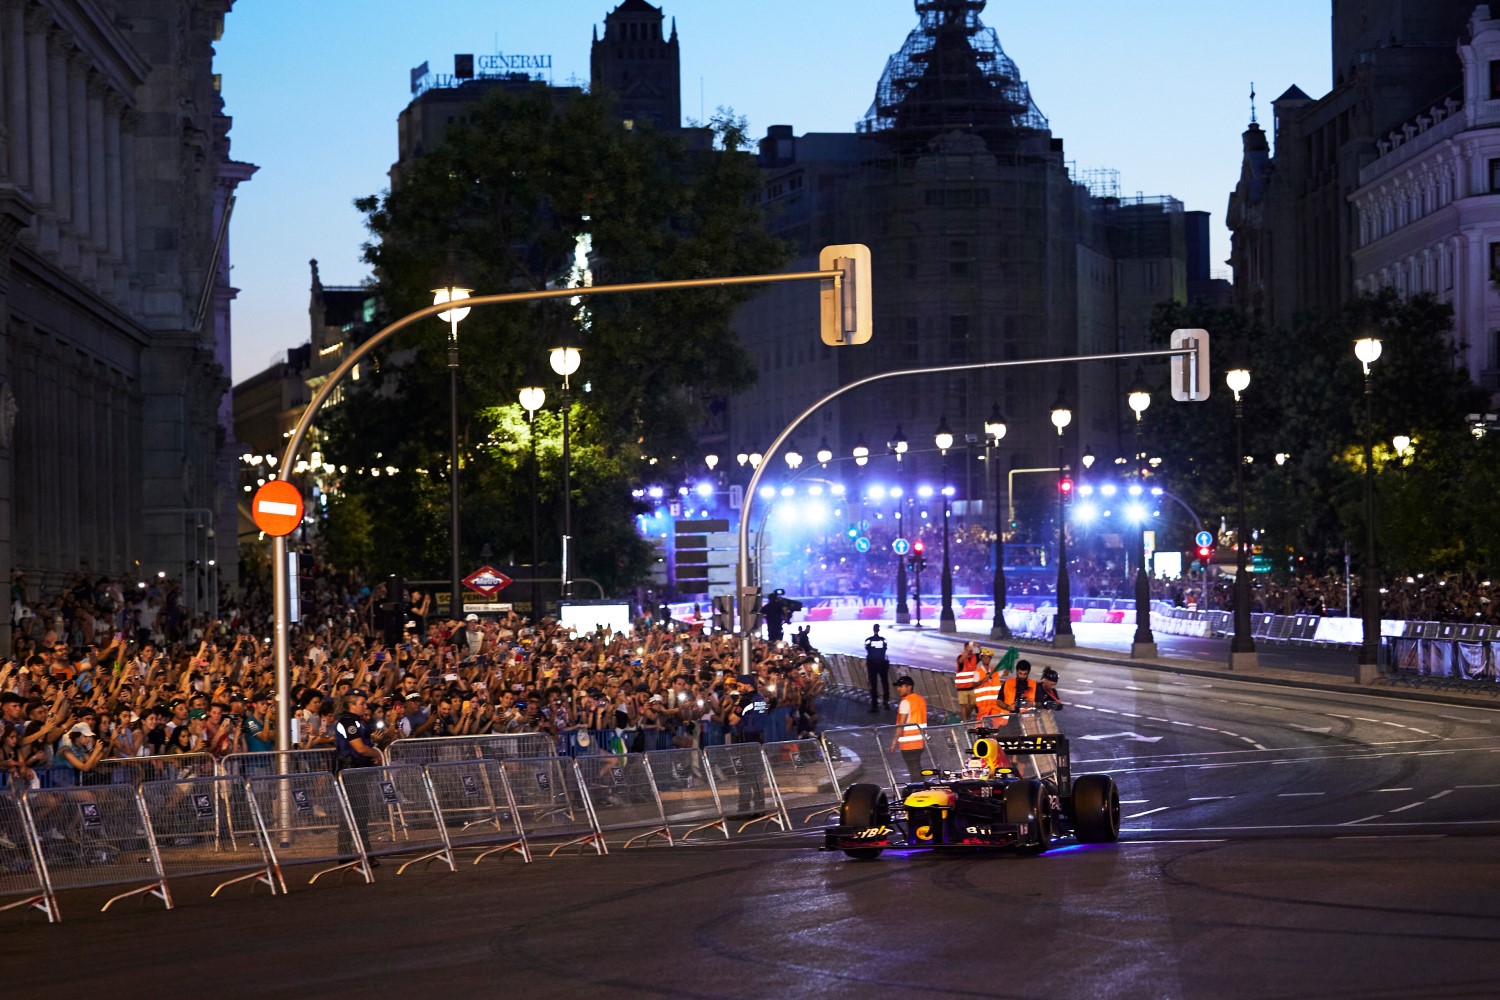 Sergio "Checo" Perez performs during Red Bull Showrun in Madrid, Spain